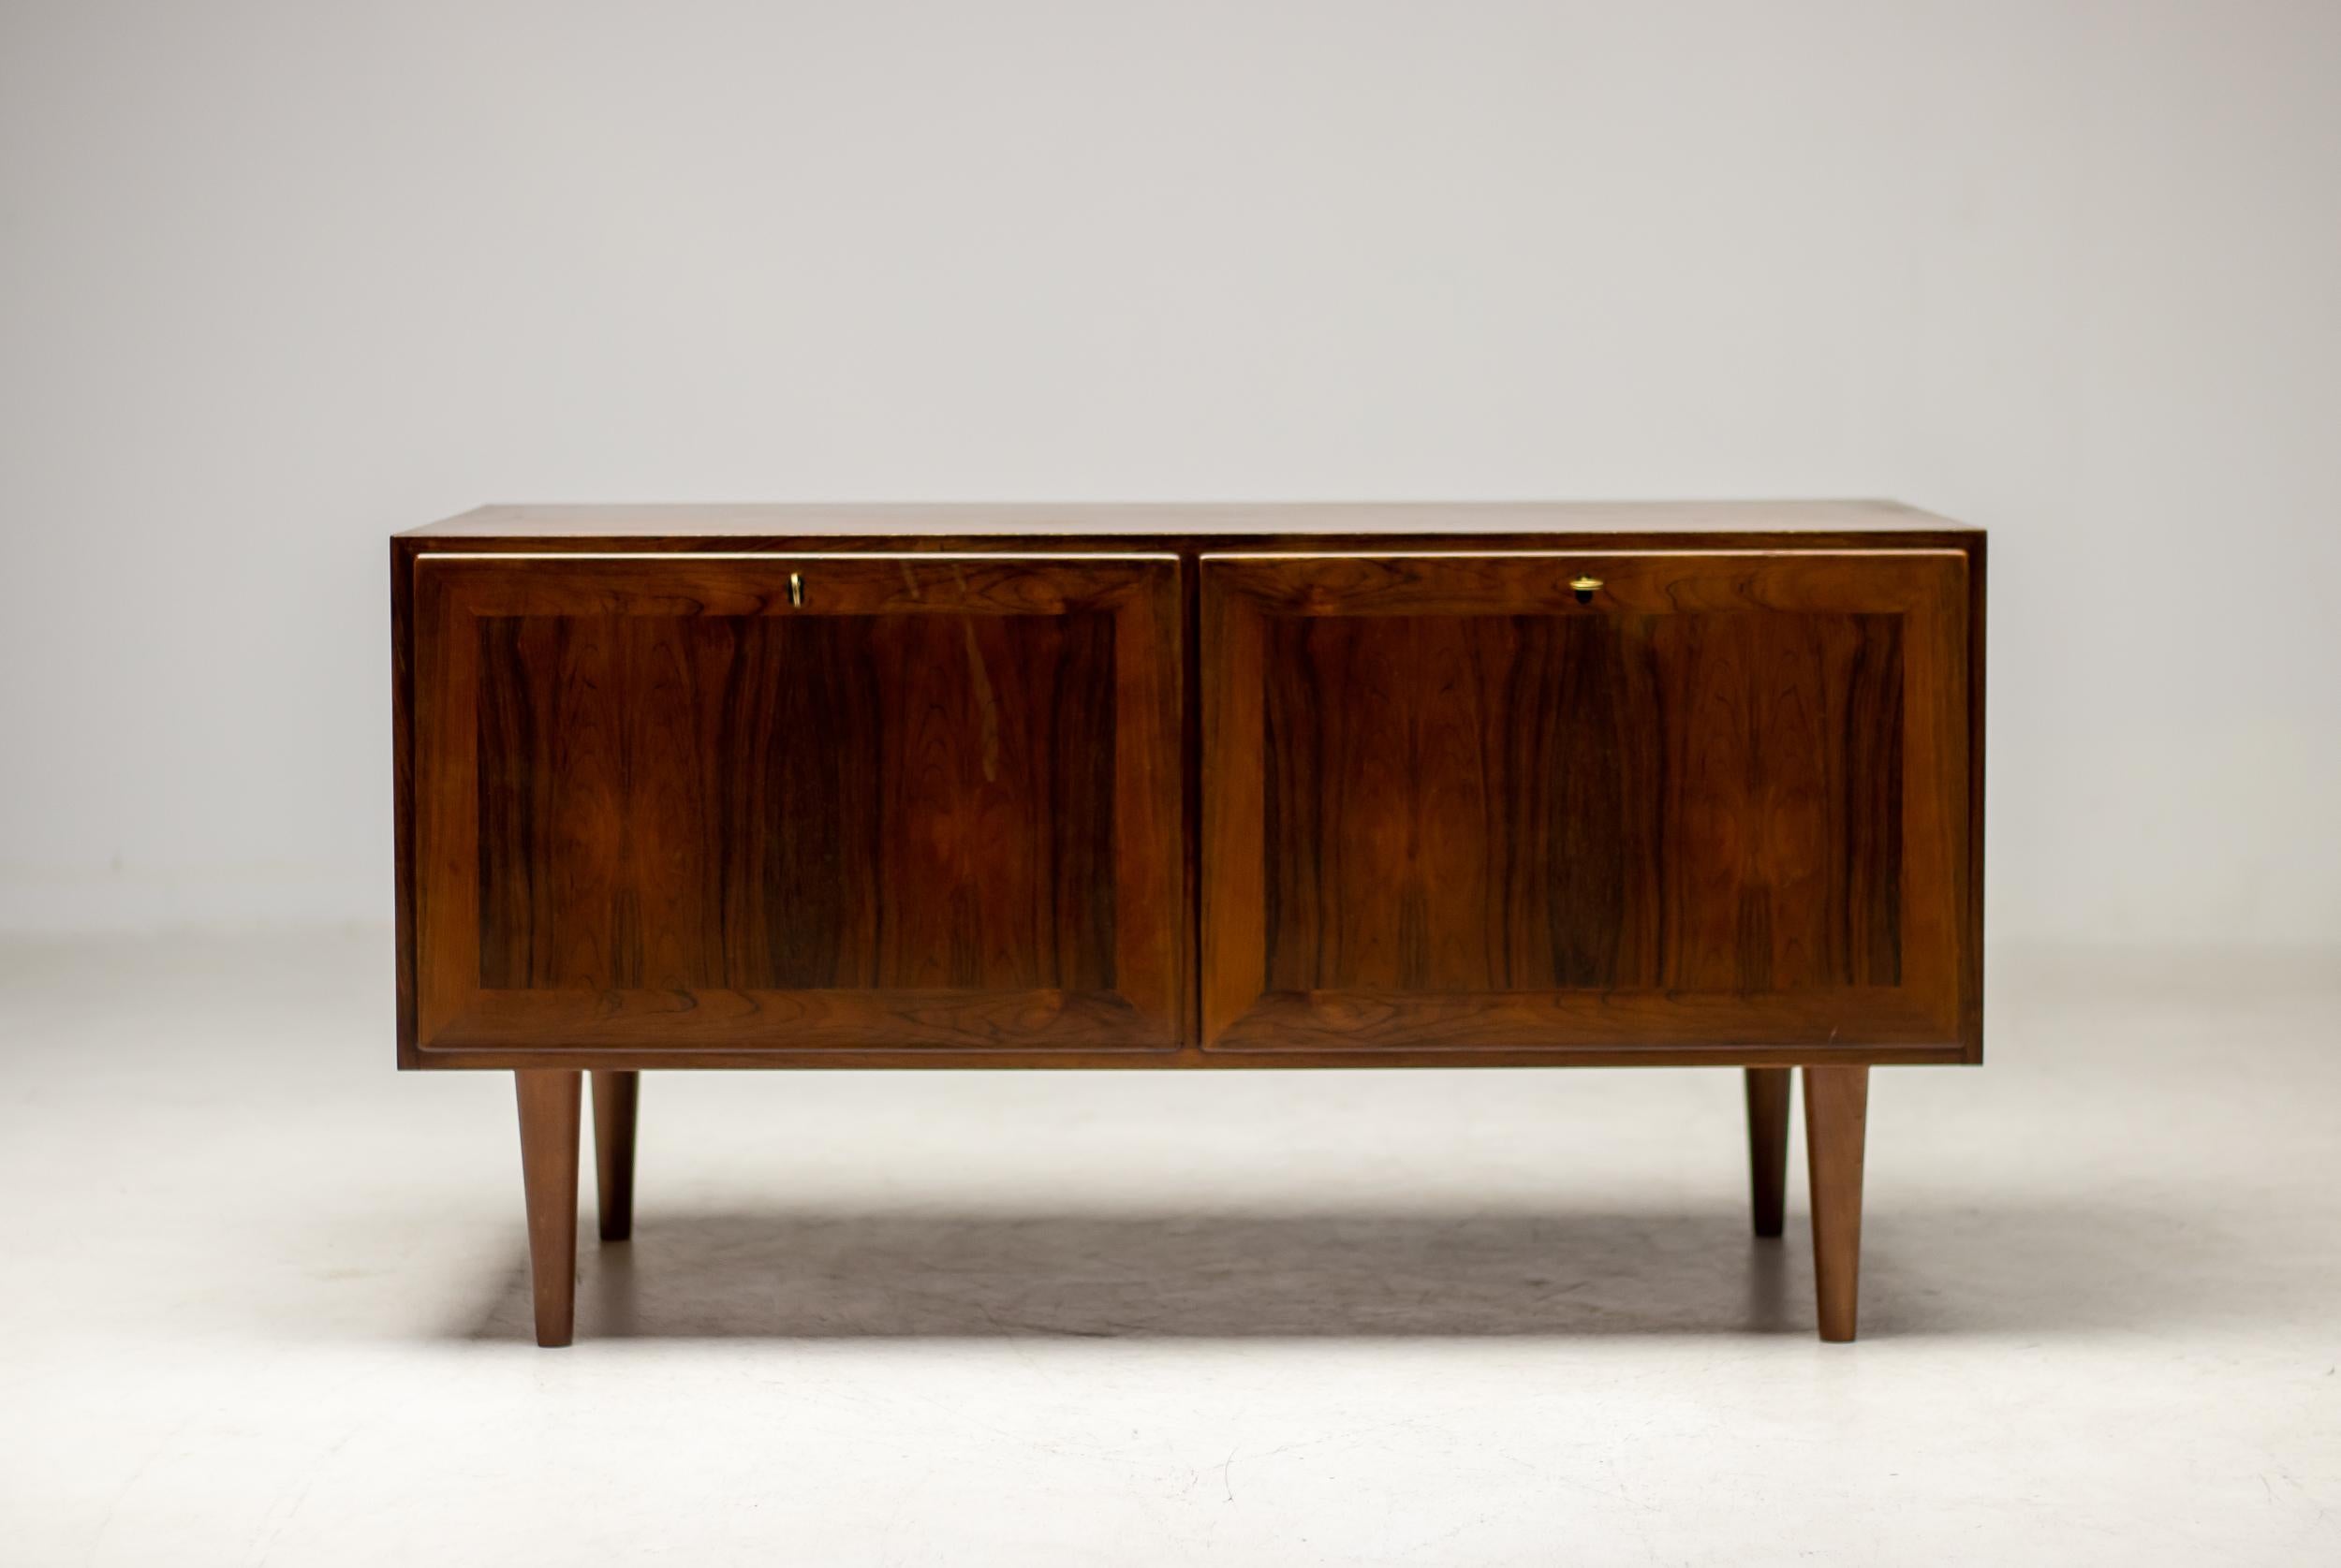 Rosewood sideboard designed by Kai Winding, produced by Poul Jeppesens Møbelfabrik.
The piece has 2 inside drawers with an opening, very suitable for high end stereo equipment storage.
Marked with label.

Kaj Winding is best known for his iconic